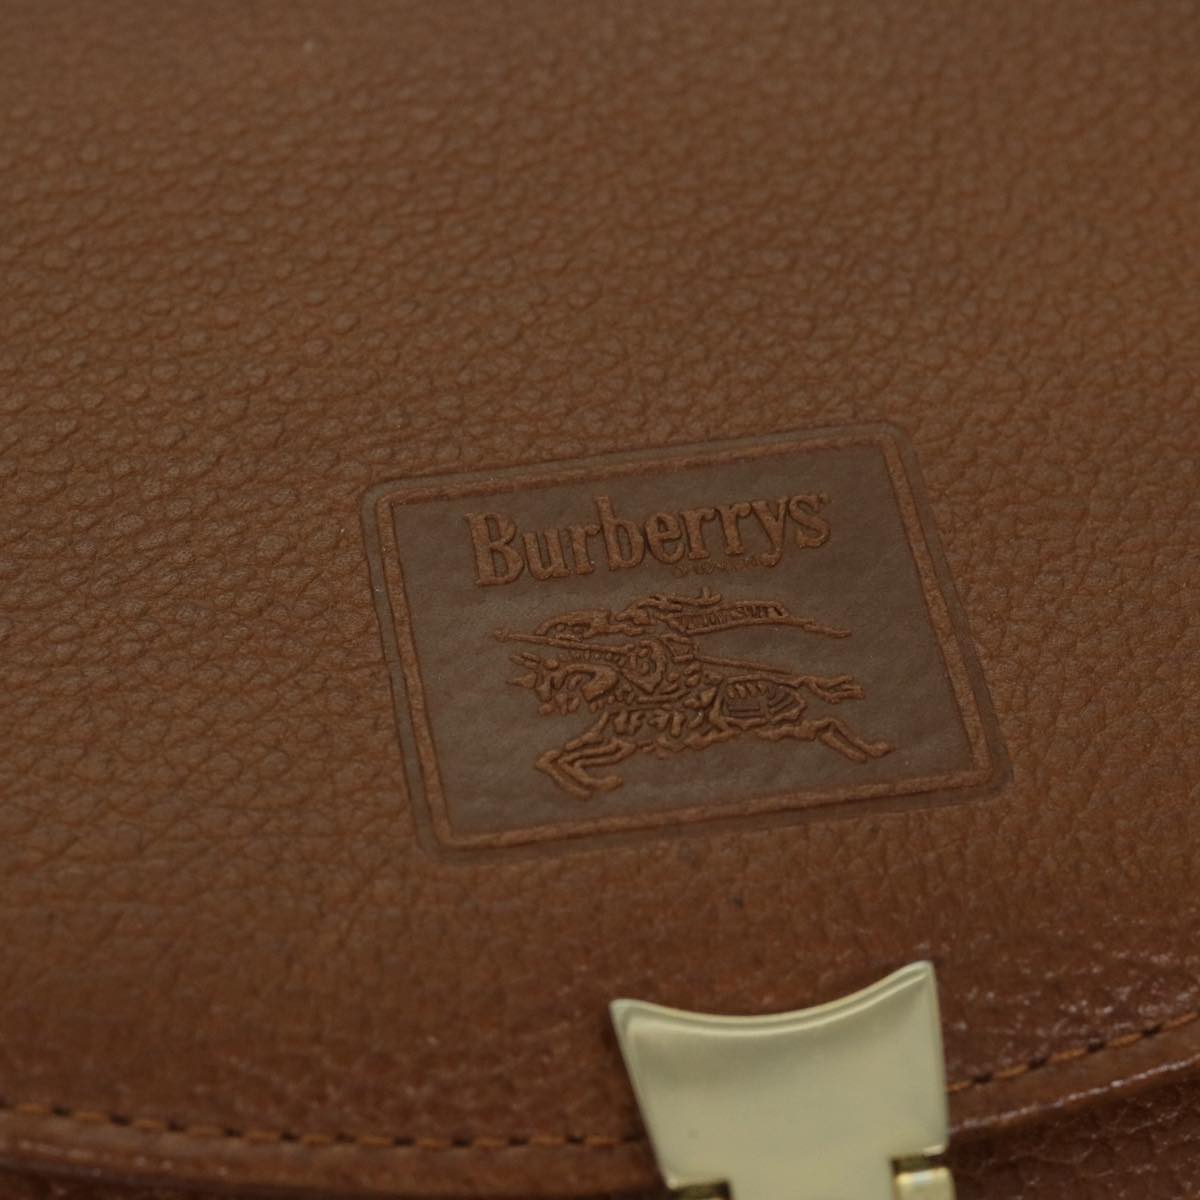 Burberrys Hand Bag Leather Brown Auth hk974